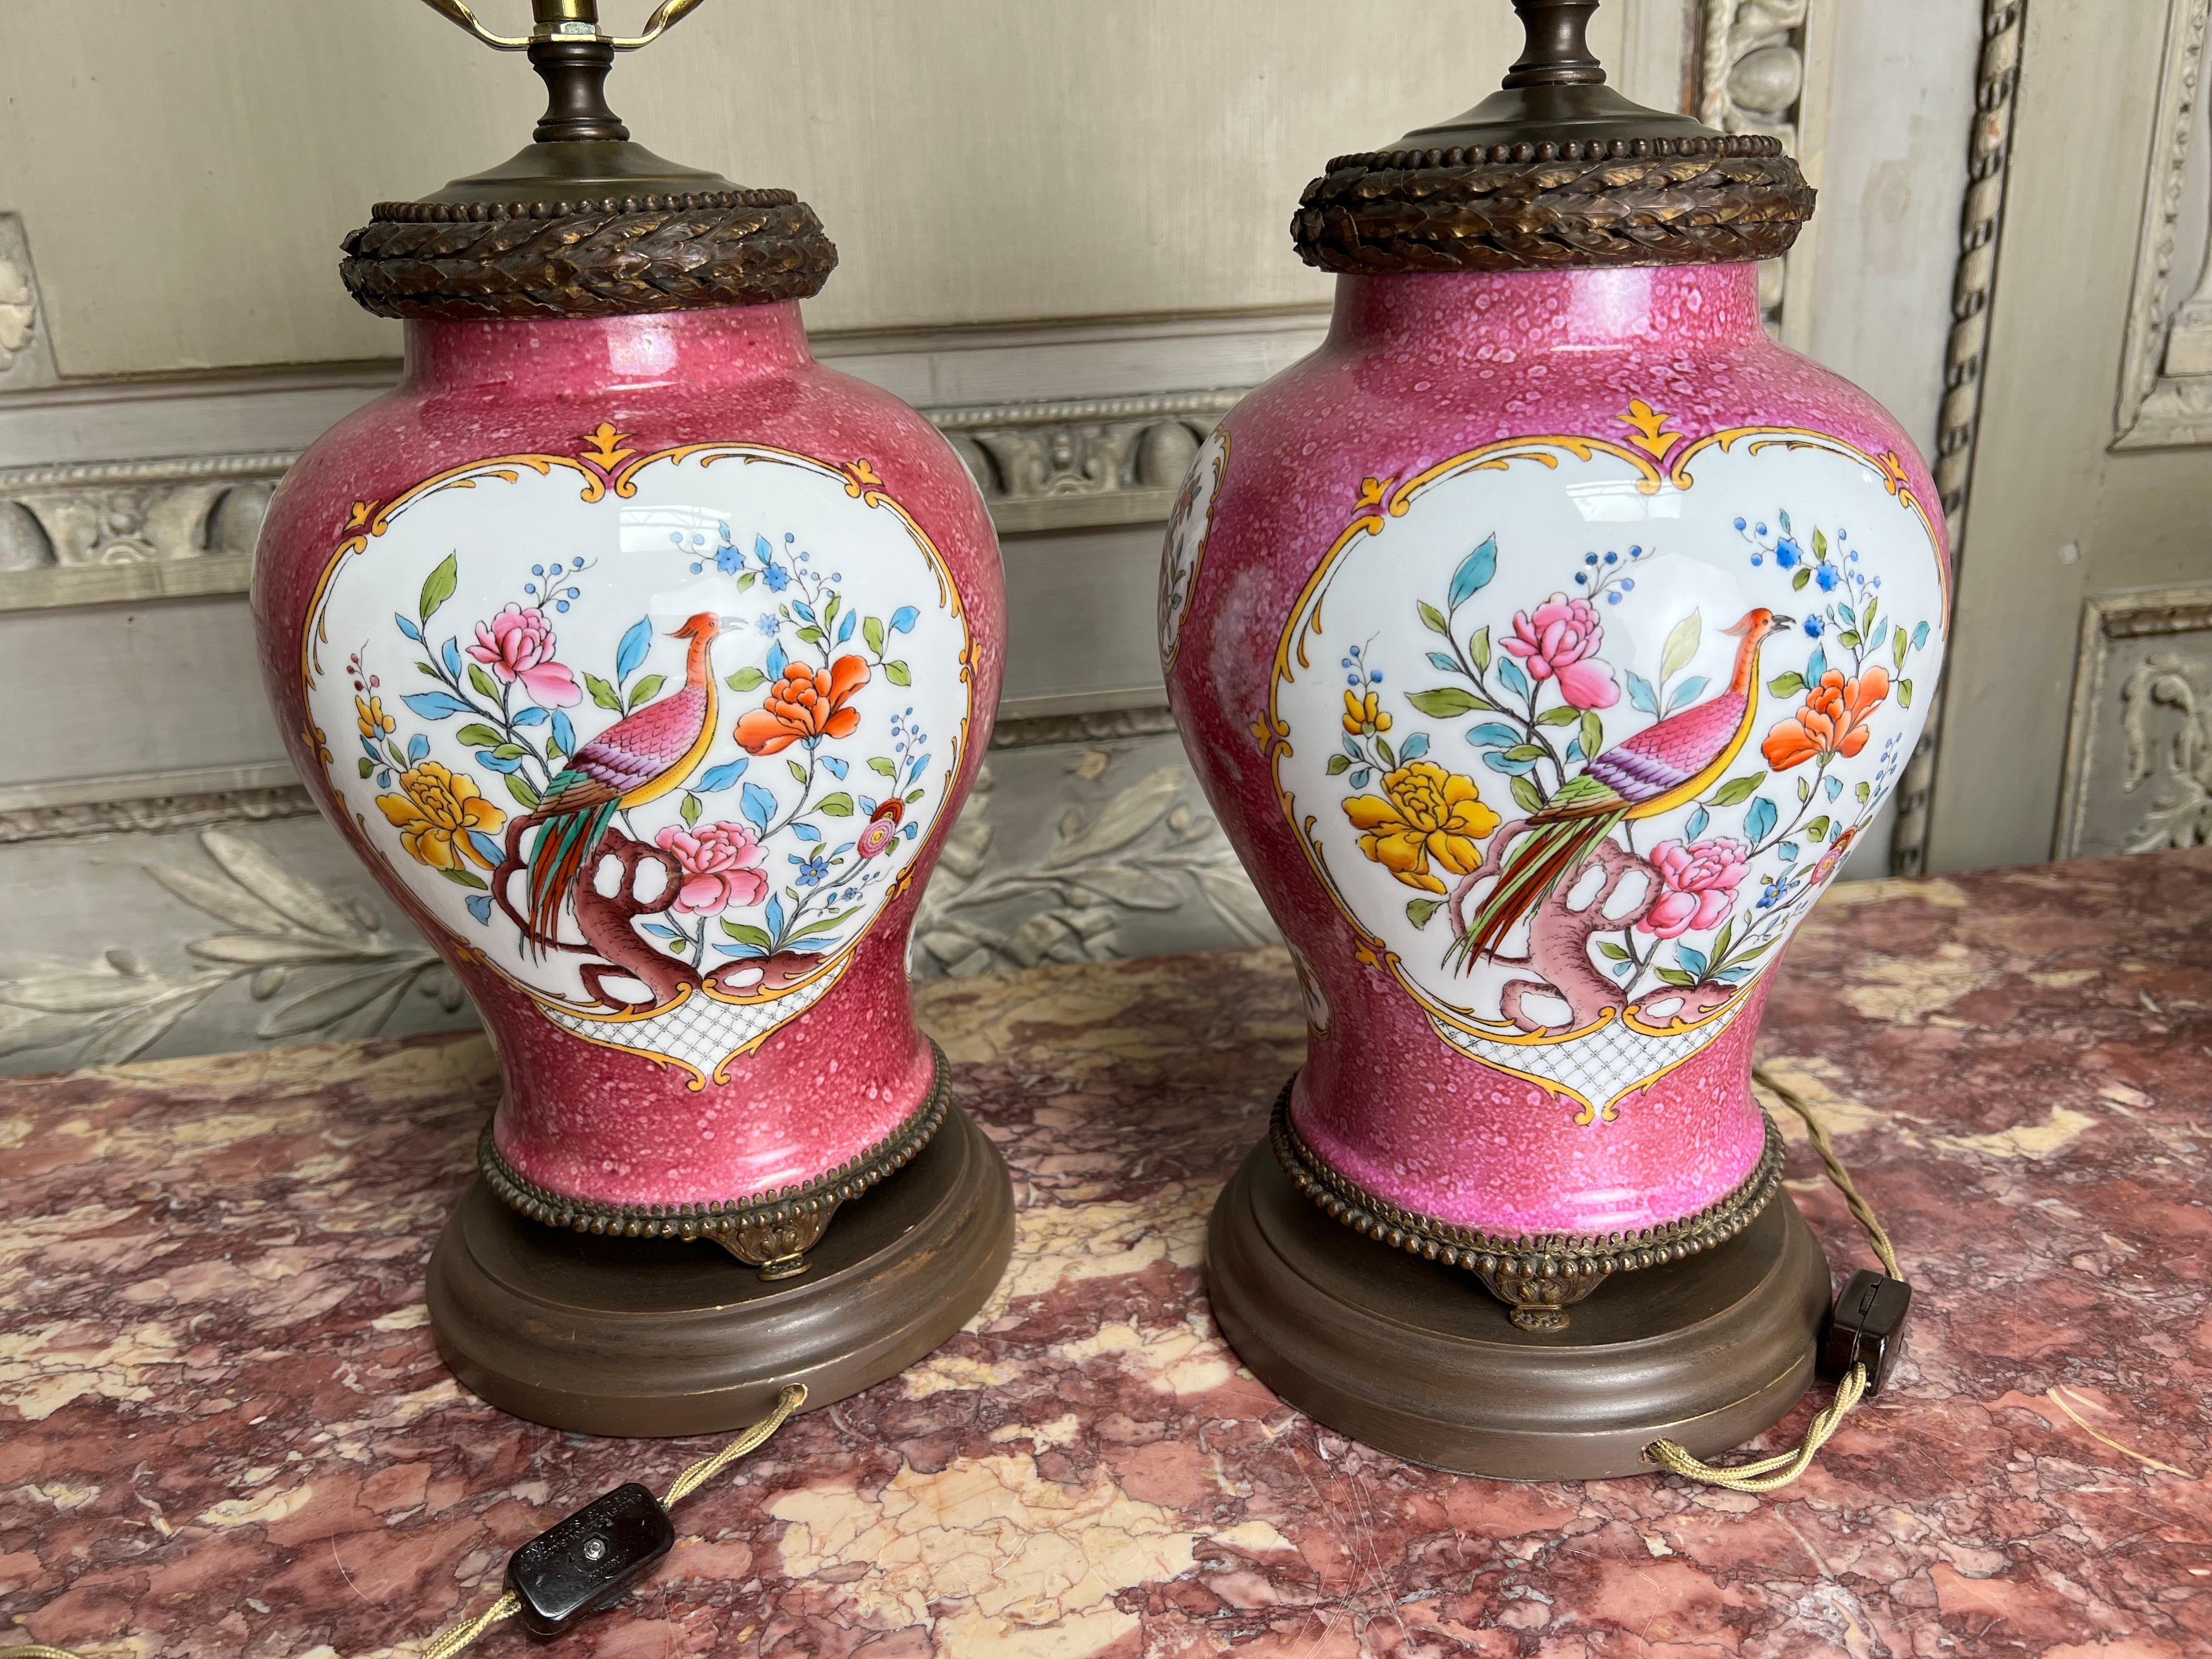 A pair of European porcelains with bronze fittings wired for lamps.  
These pink and white porcelain jars are decorated in polychrome enamel with birds and flowers.  A custom base and shade were added in the late 20th century at the time they were